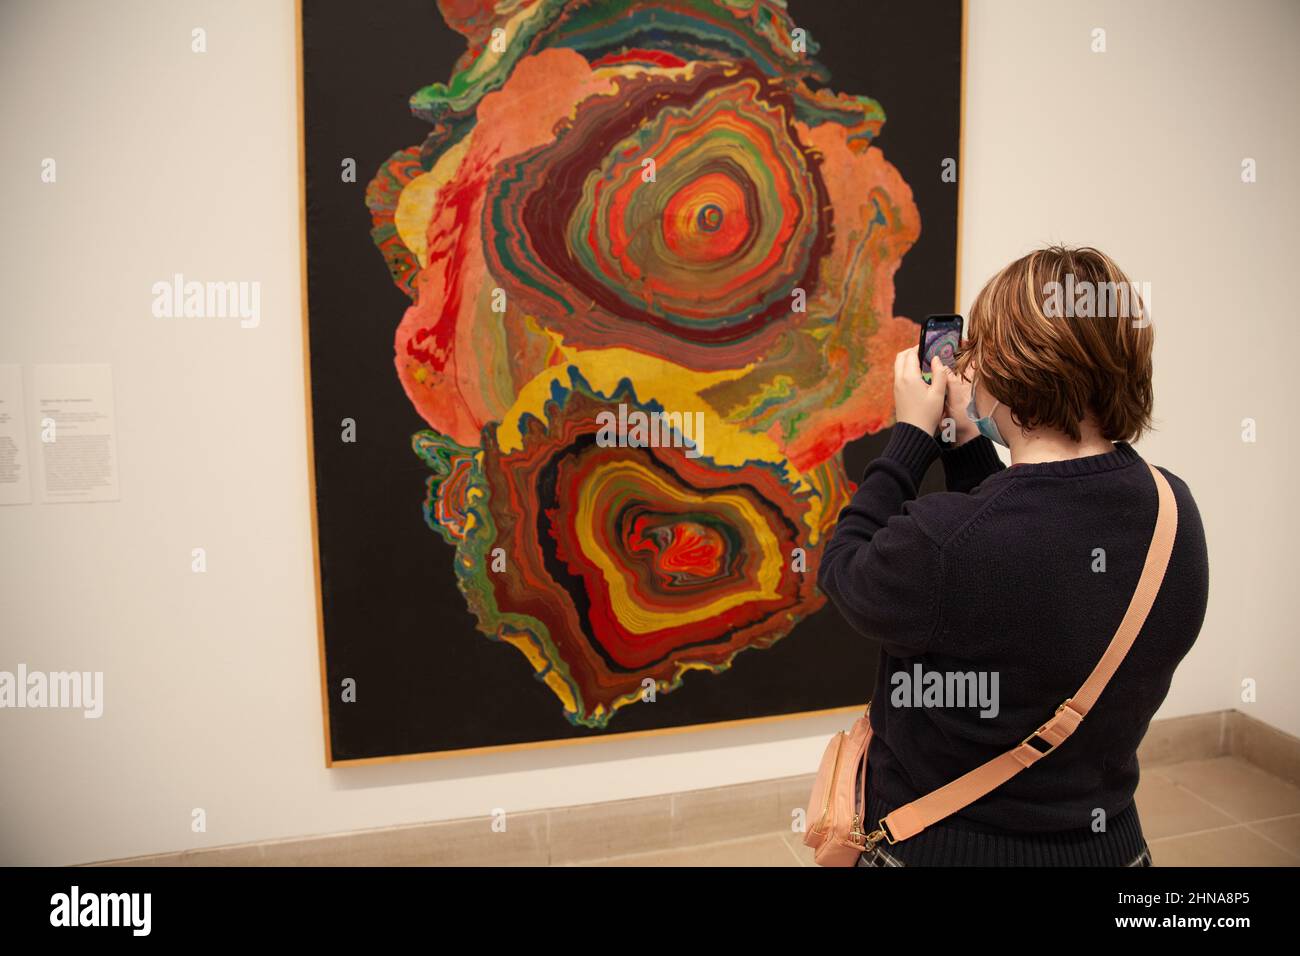 Teenage girl taking a picture with her phone of modern art work at a museum. Stock Photo